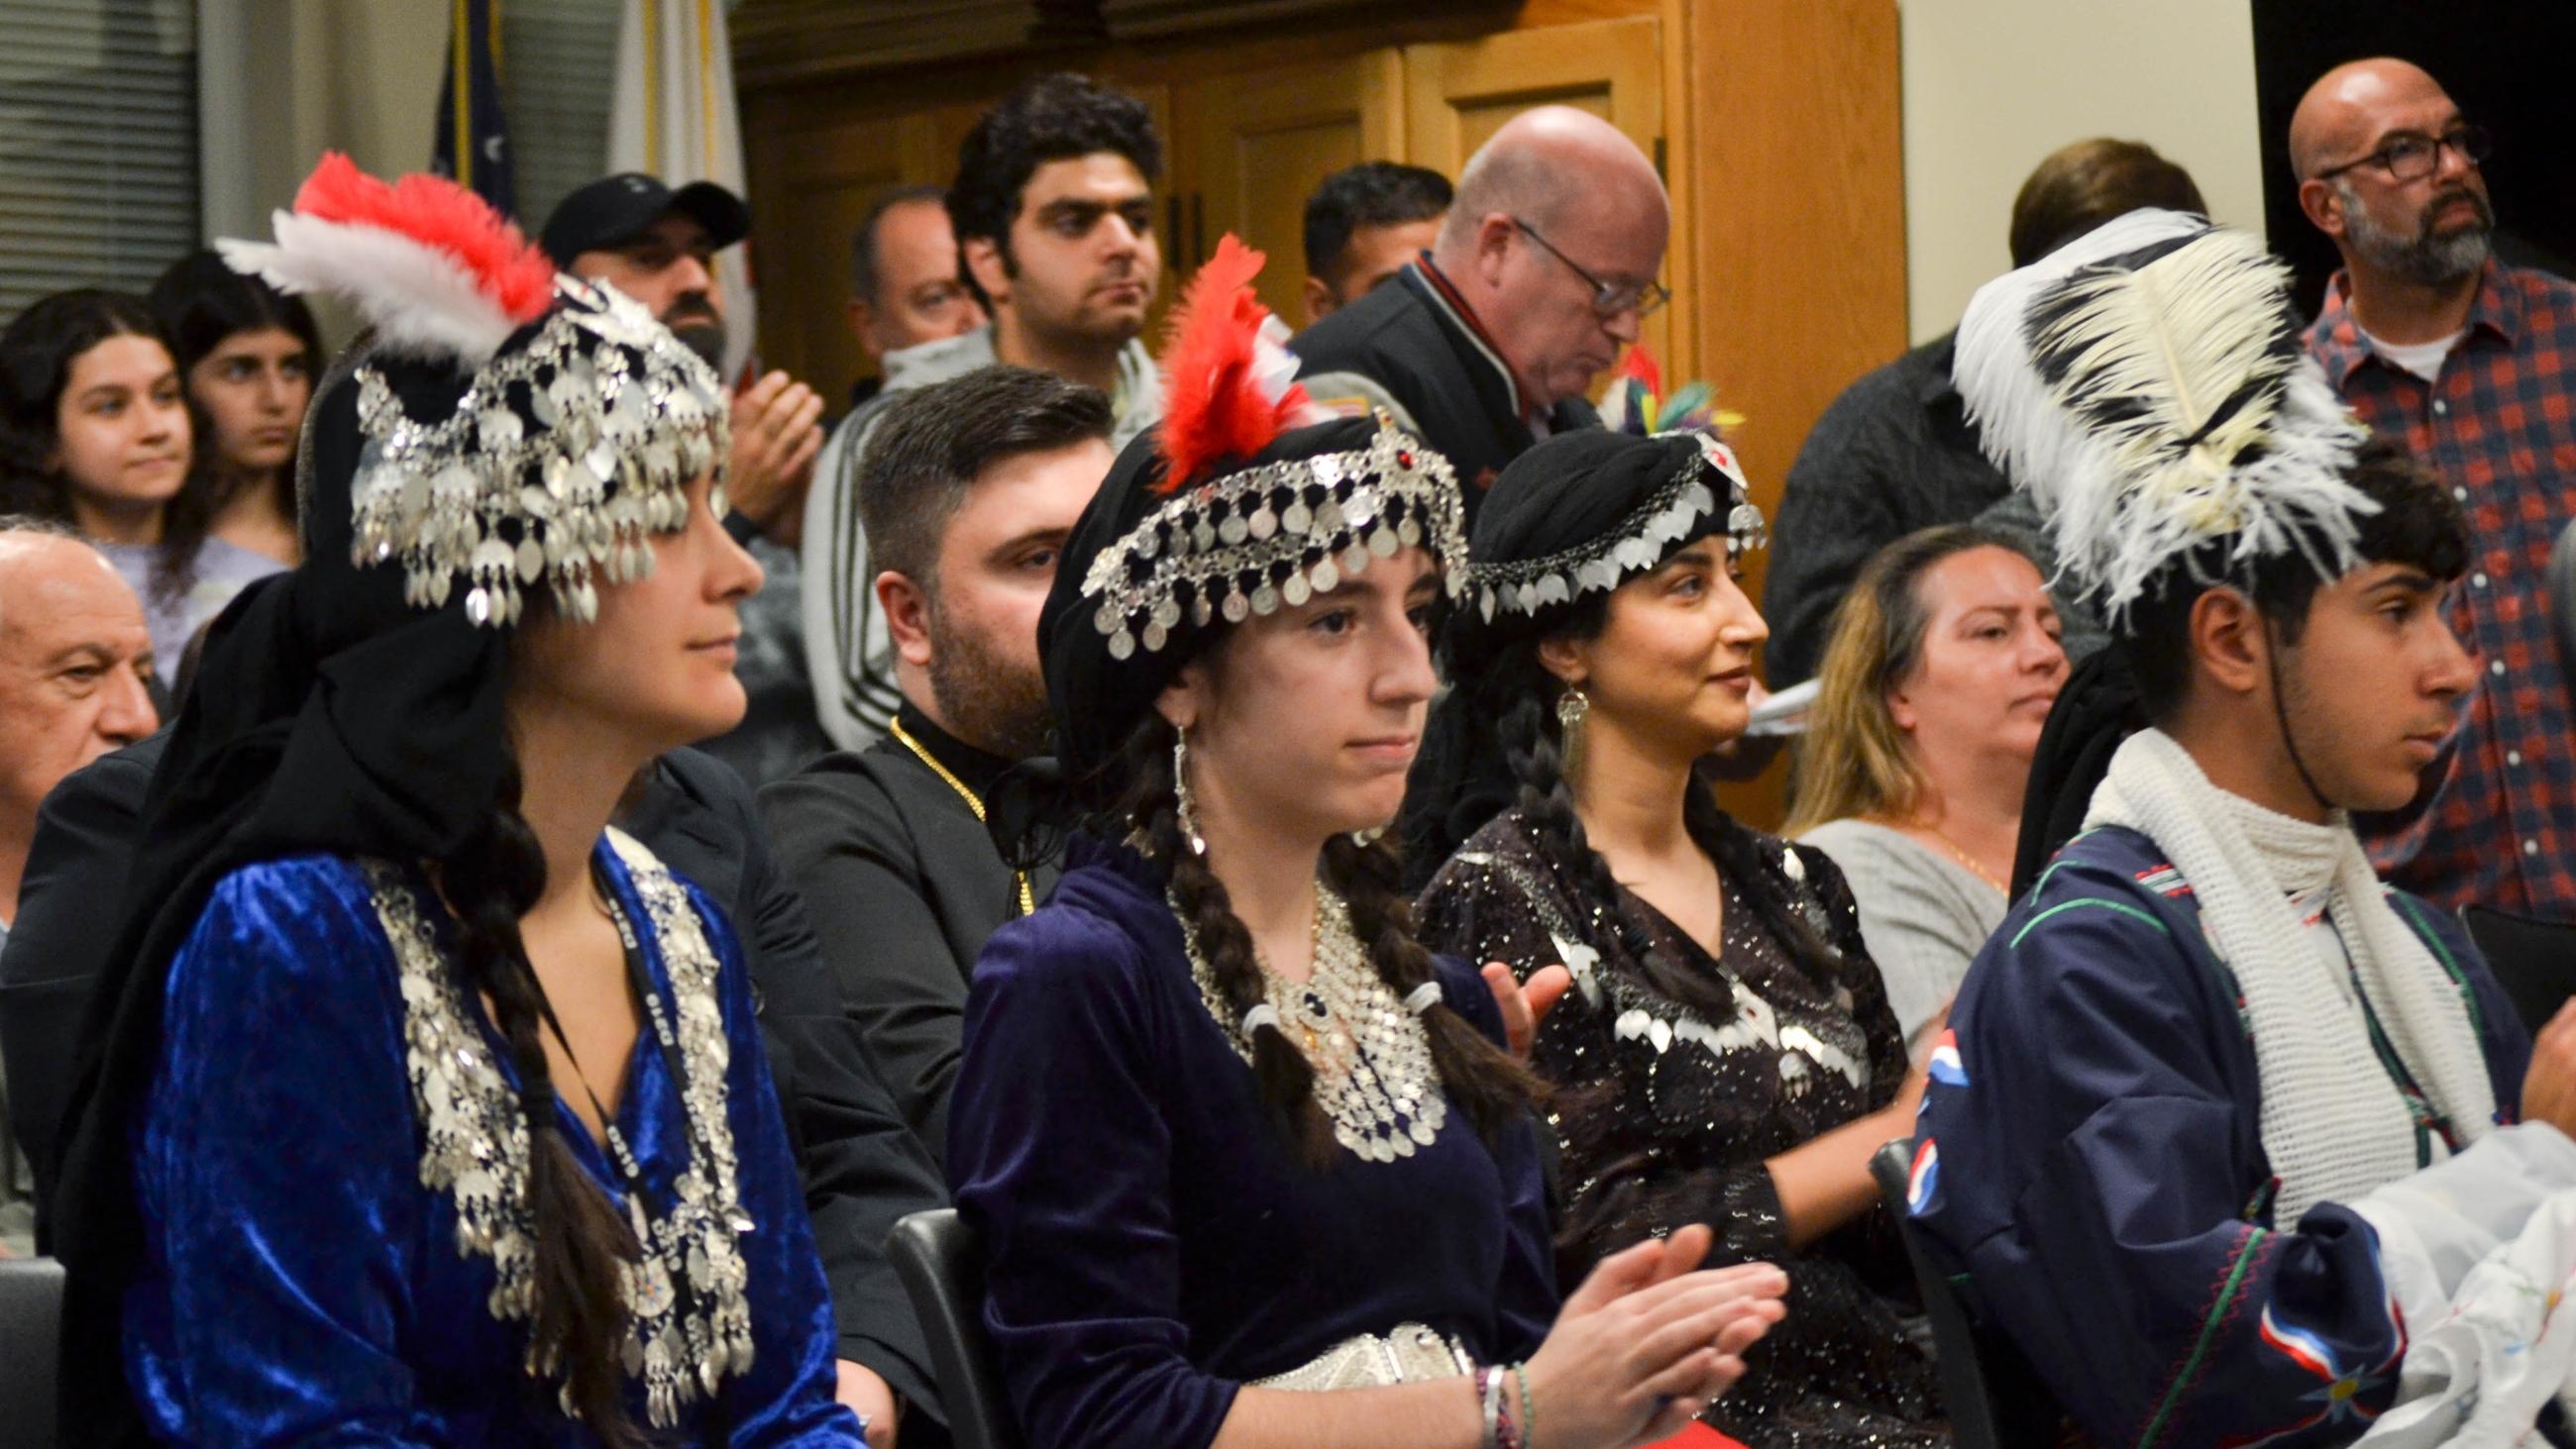 Attendees at the D219 November board meeting dress in traditional Assyrian clothing awaiting a vote on the historic Assyrian language course.